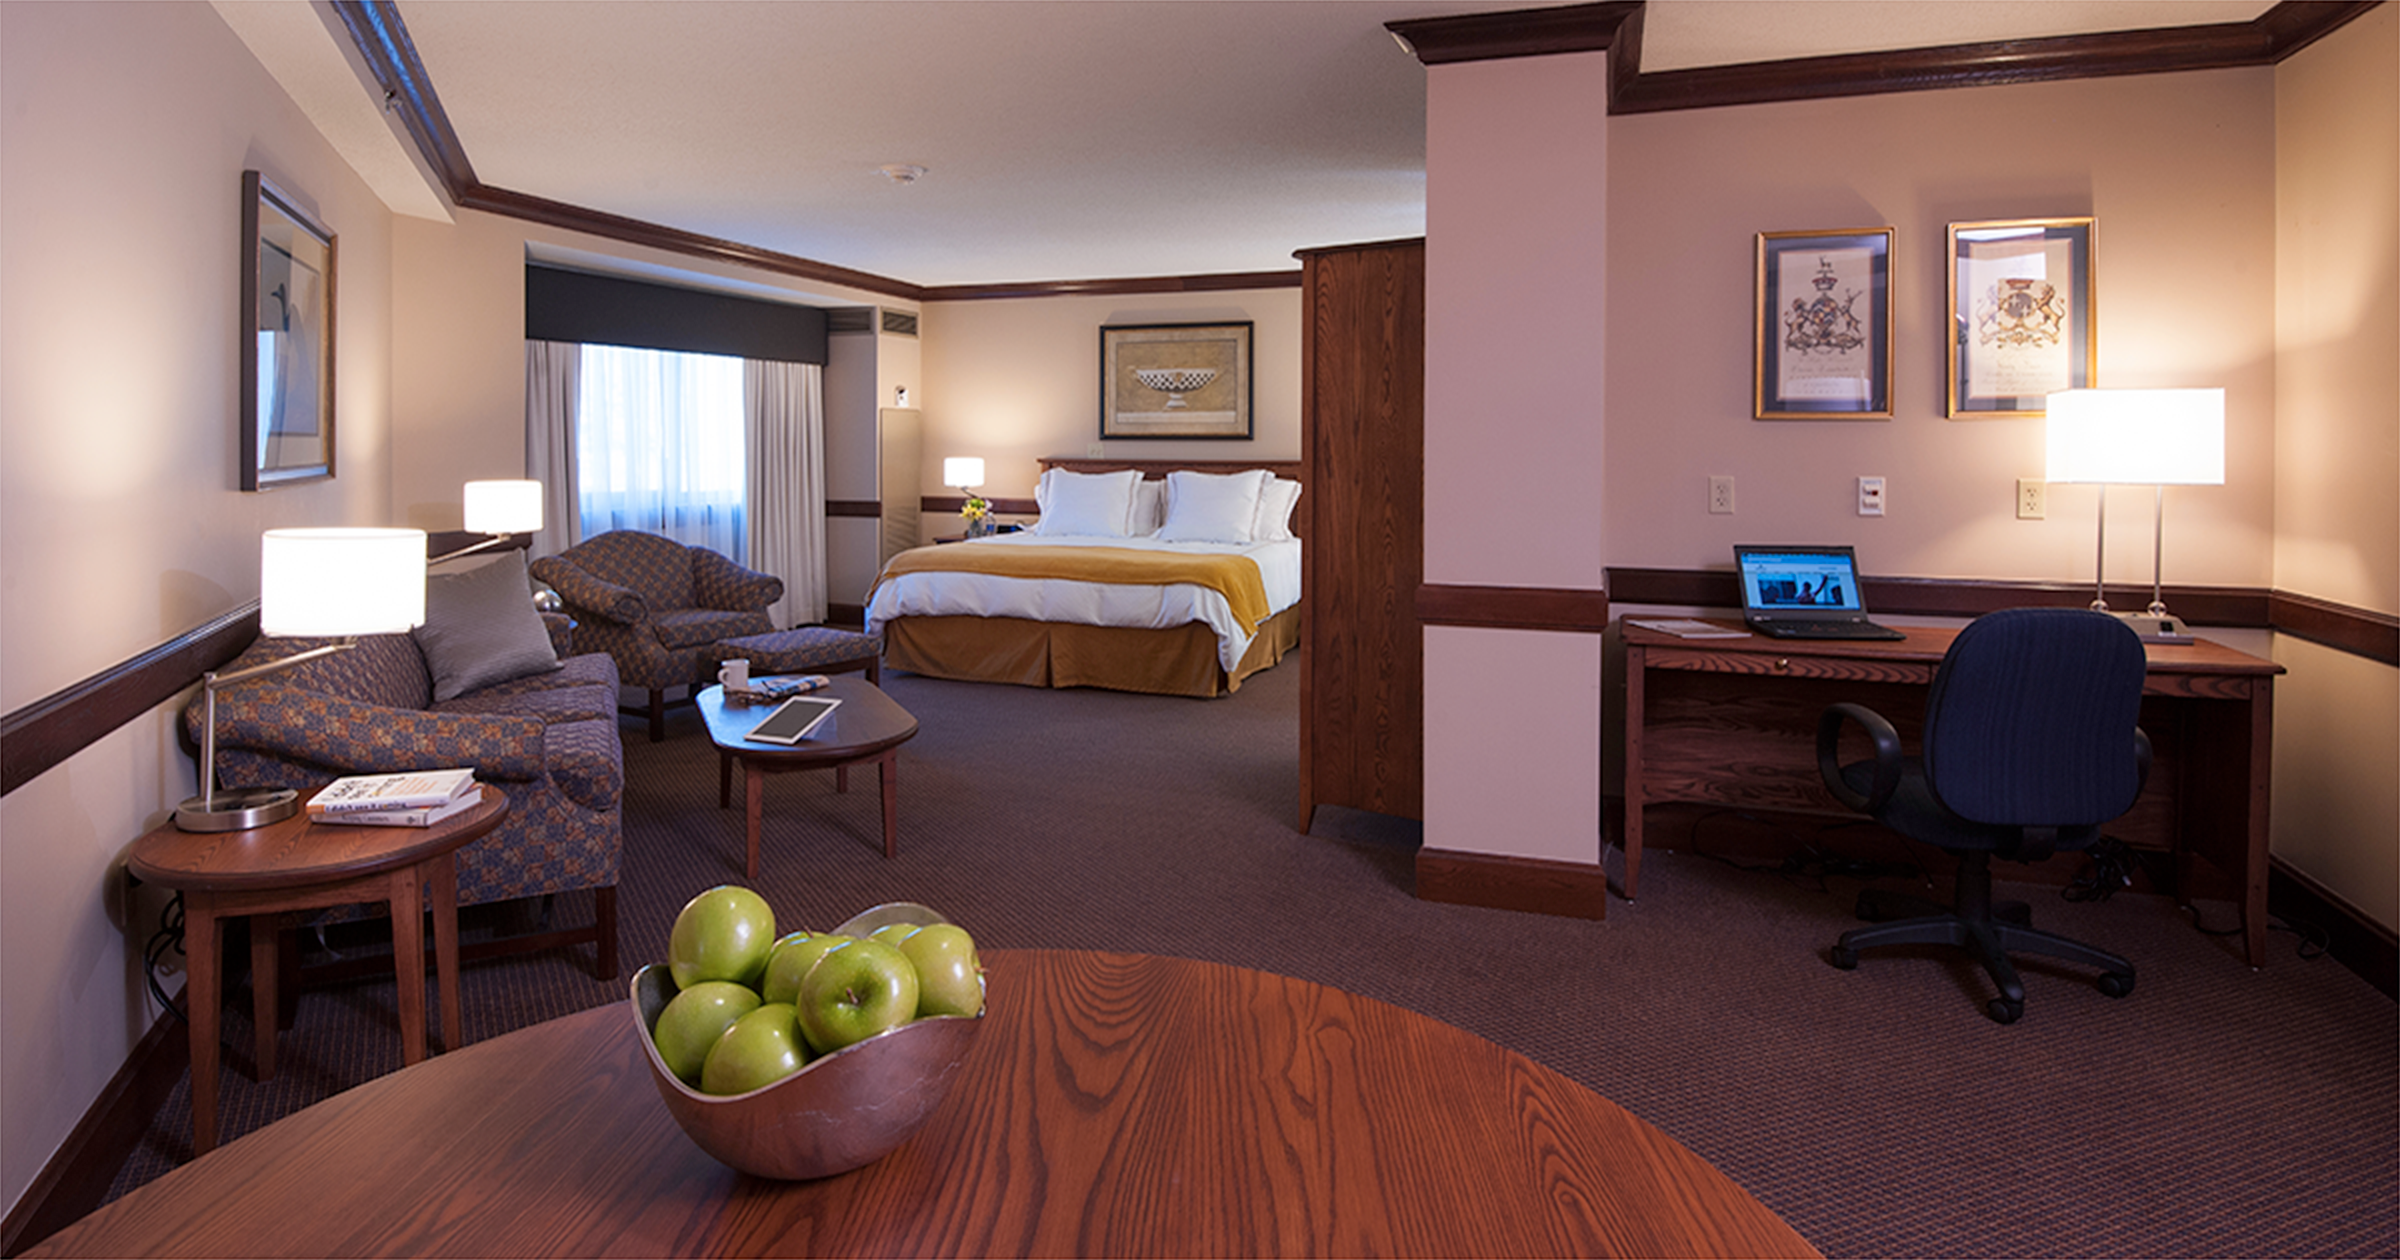 a view of a hotel bed with a bowl of green apples in near sight and a laptop in the corner.